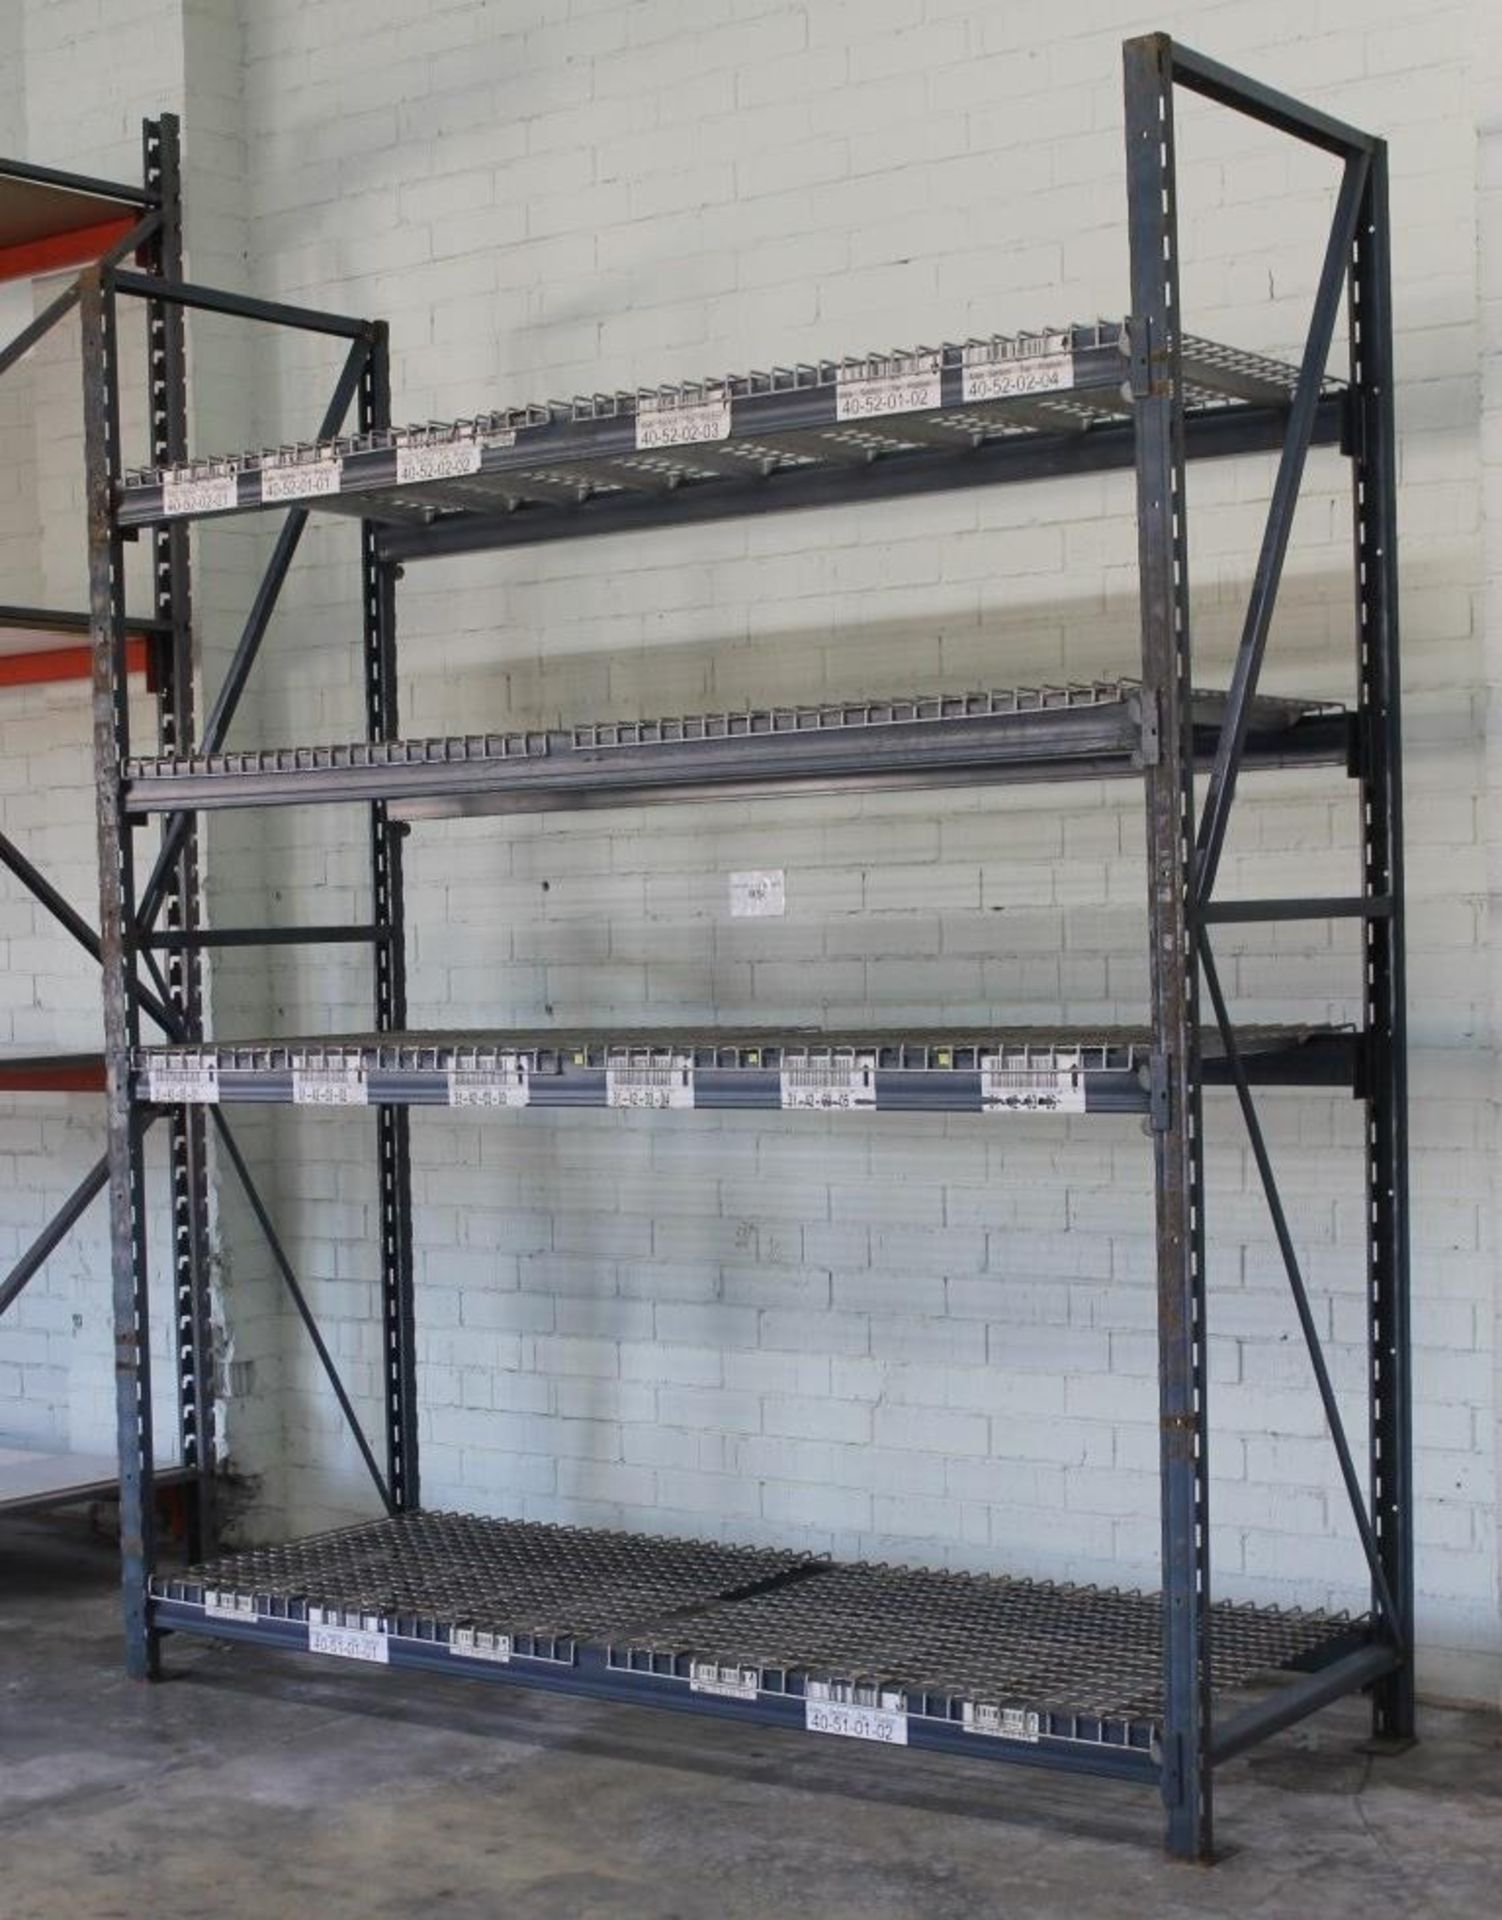 120"H X 36"D X 96"L STOCK ROOM SHELVING - Image 2 of 3